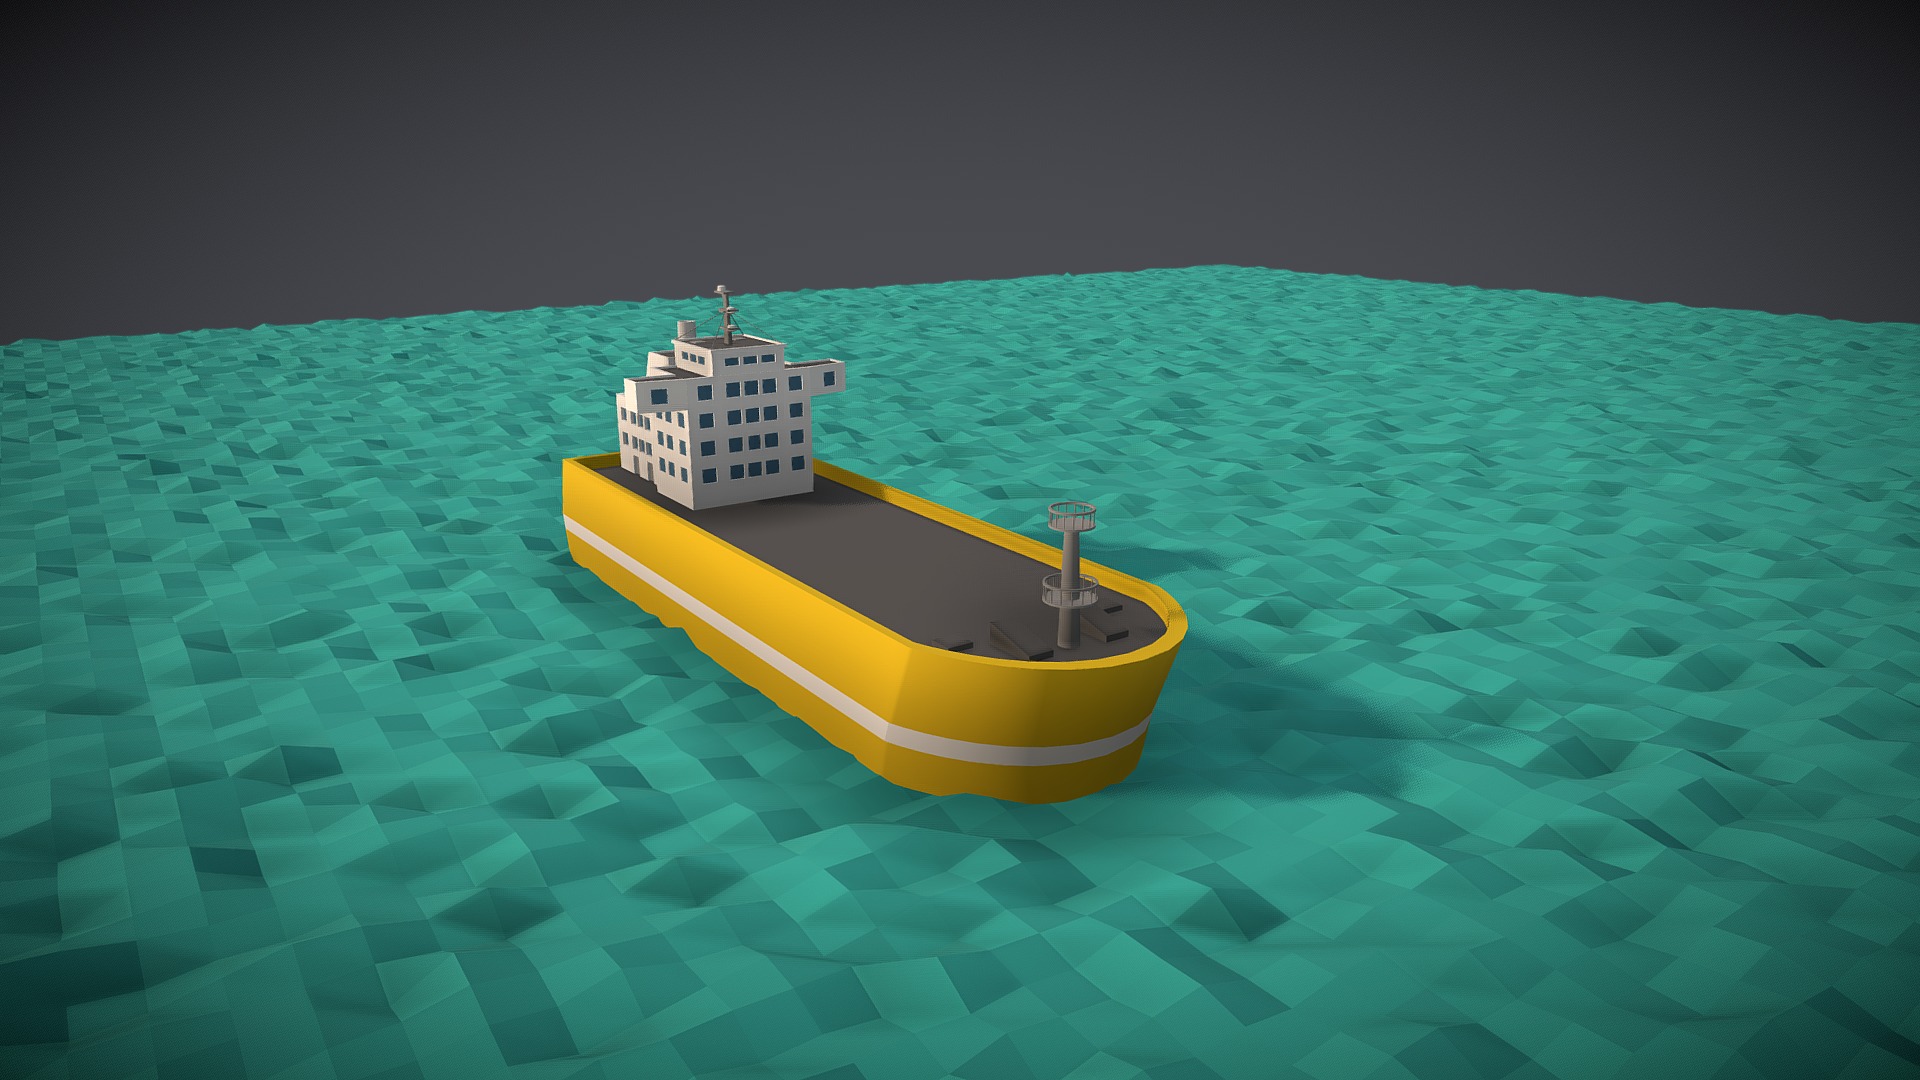 3D model Low-Poly Empty Cargo Boat - This is a 3D model of the Low-Poly Empty Cargo Boat. The 3D model is about a small yellow boat in the water.